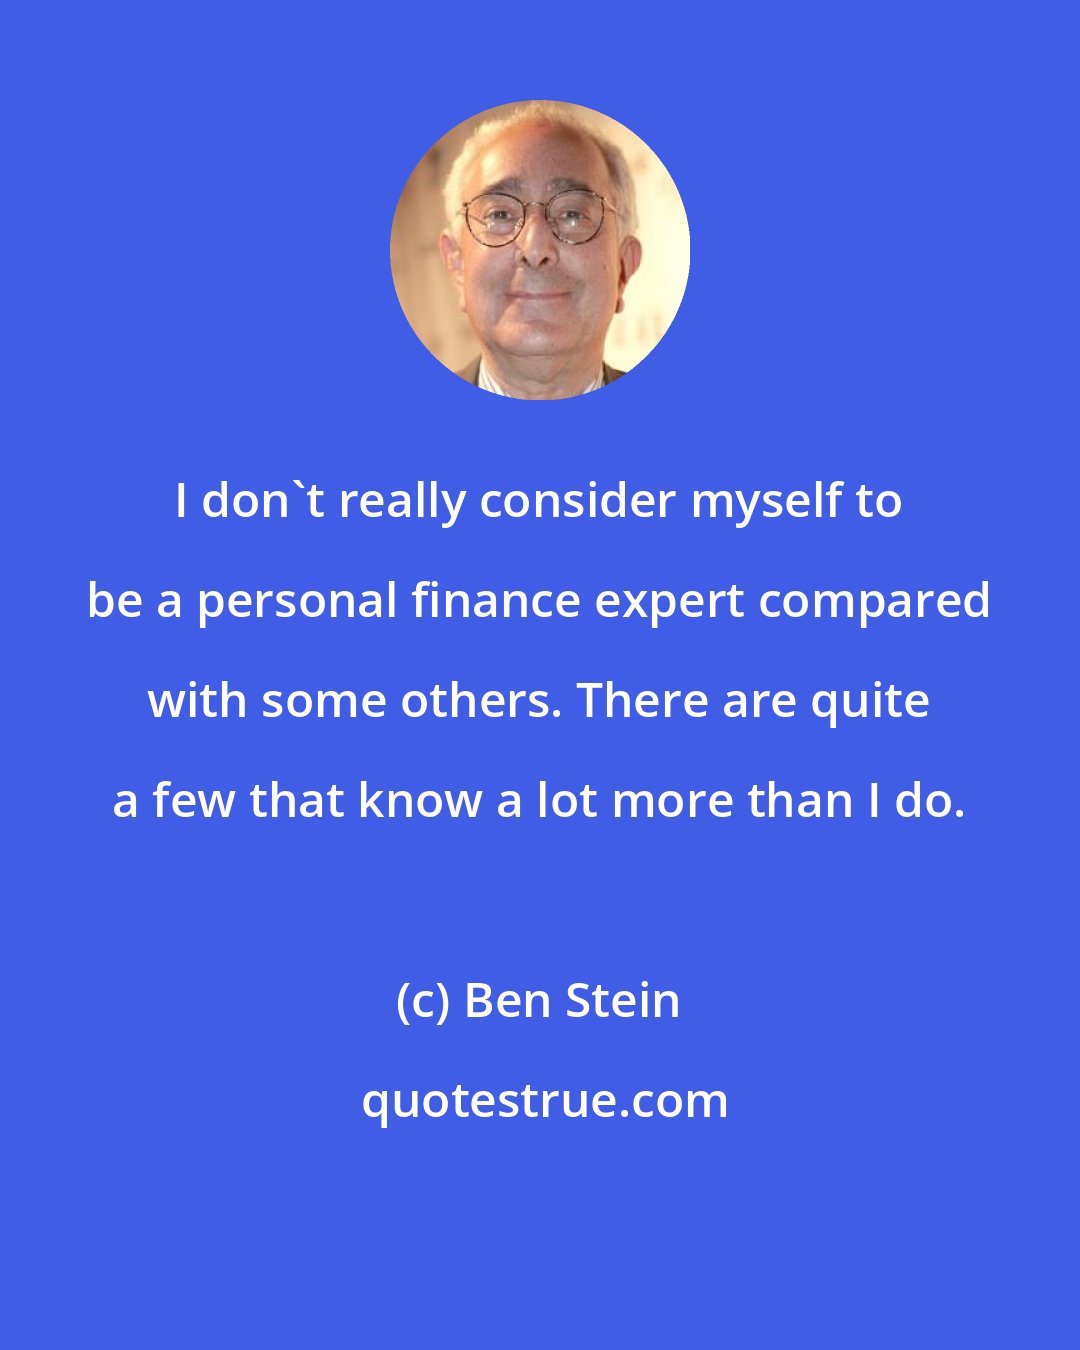 Ben Stein: I don't really consider myself to be a personal finance expert compared with some others. There are quite a few that know a lot more than I do.